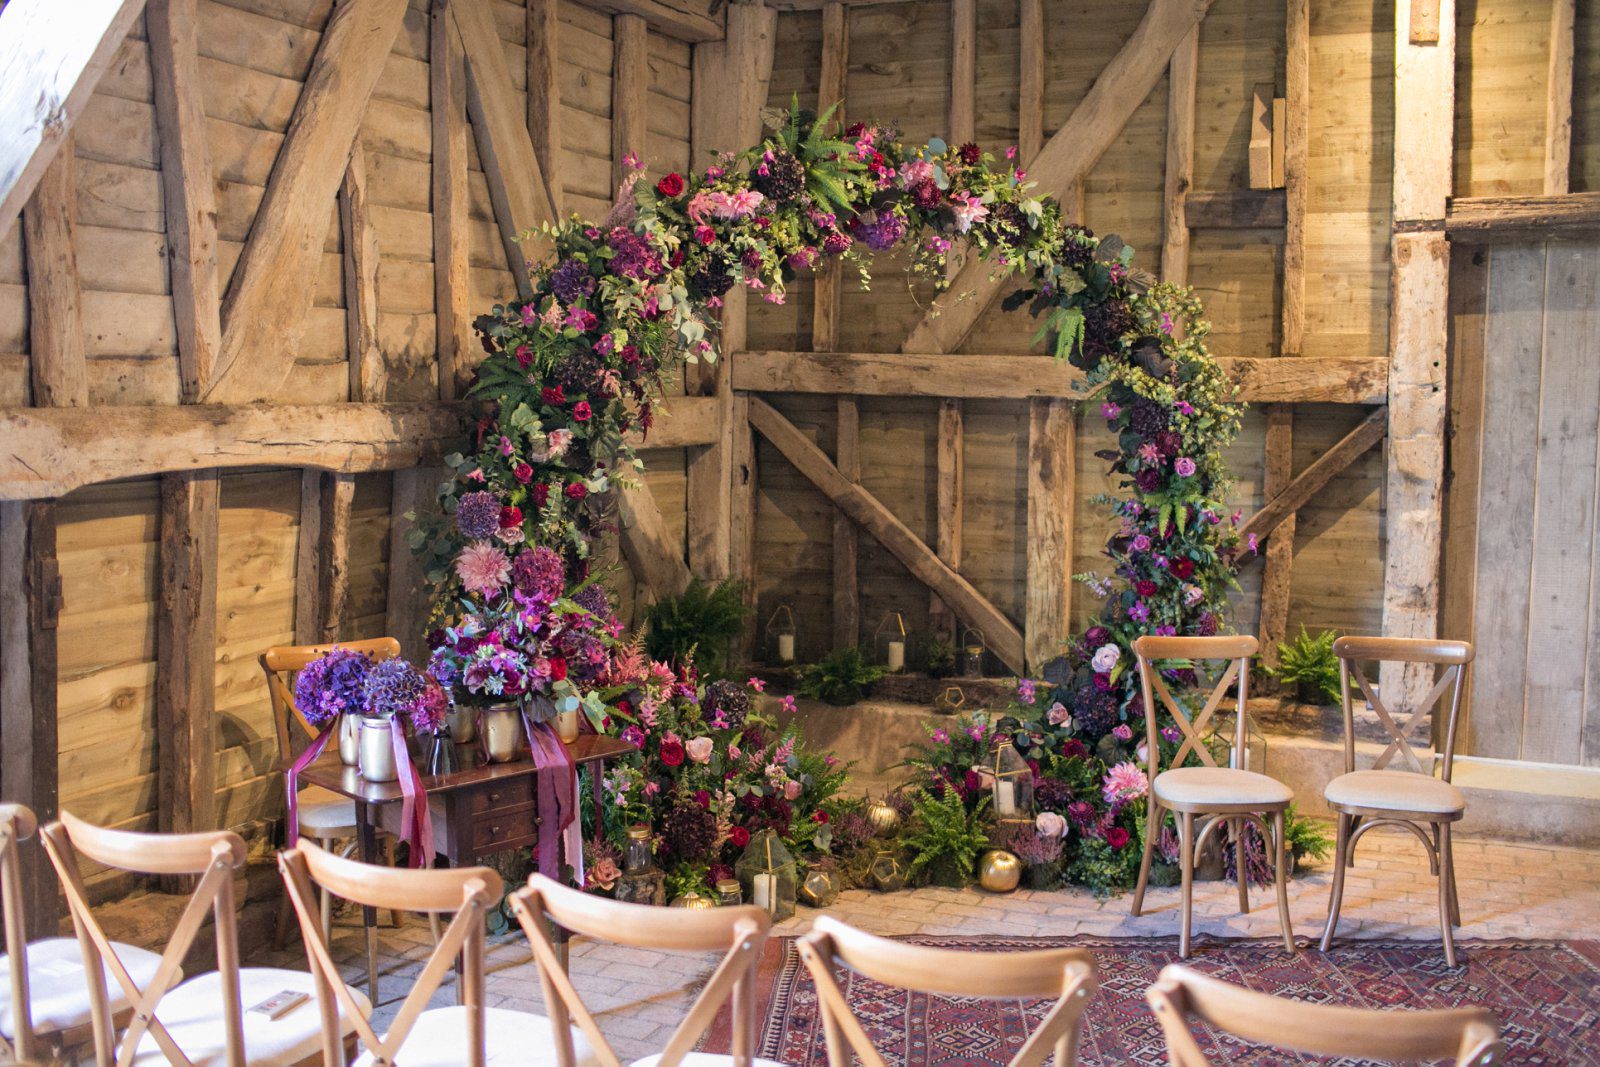 A moongate arch used as a ceremony backdrop at High Billinghurst Farm